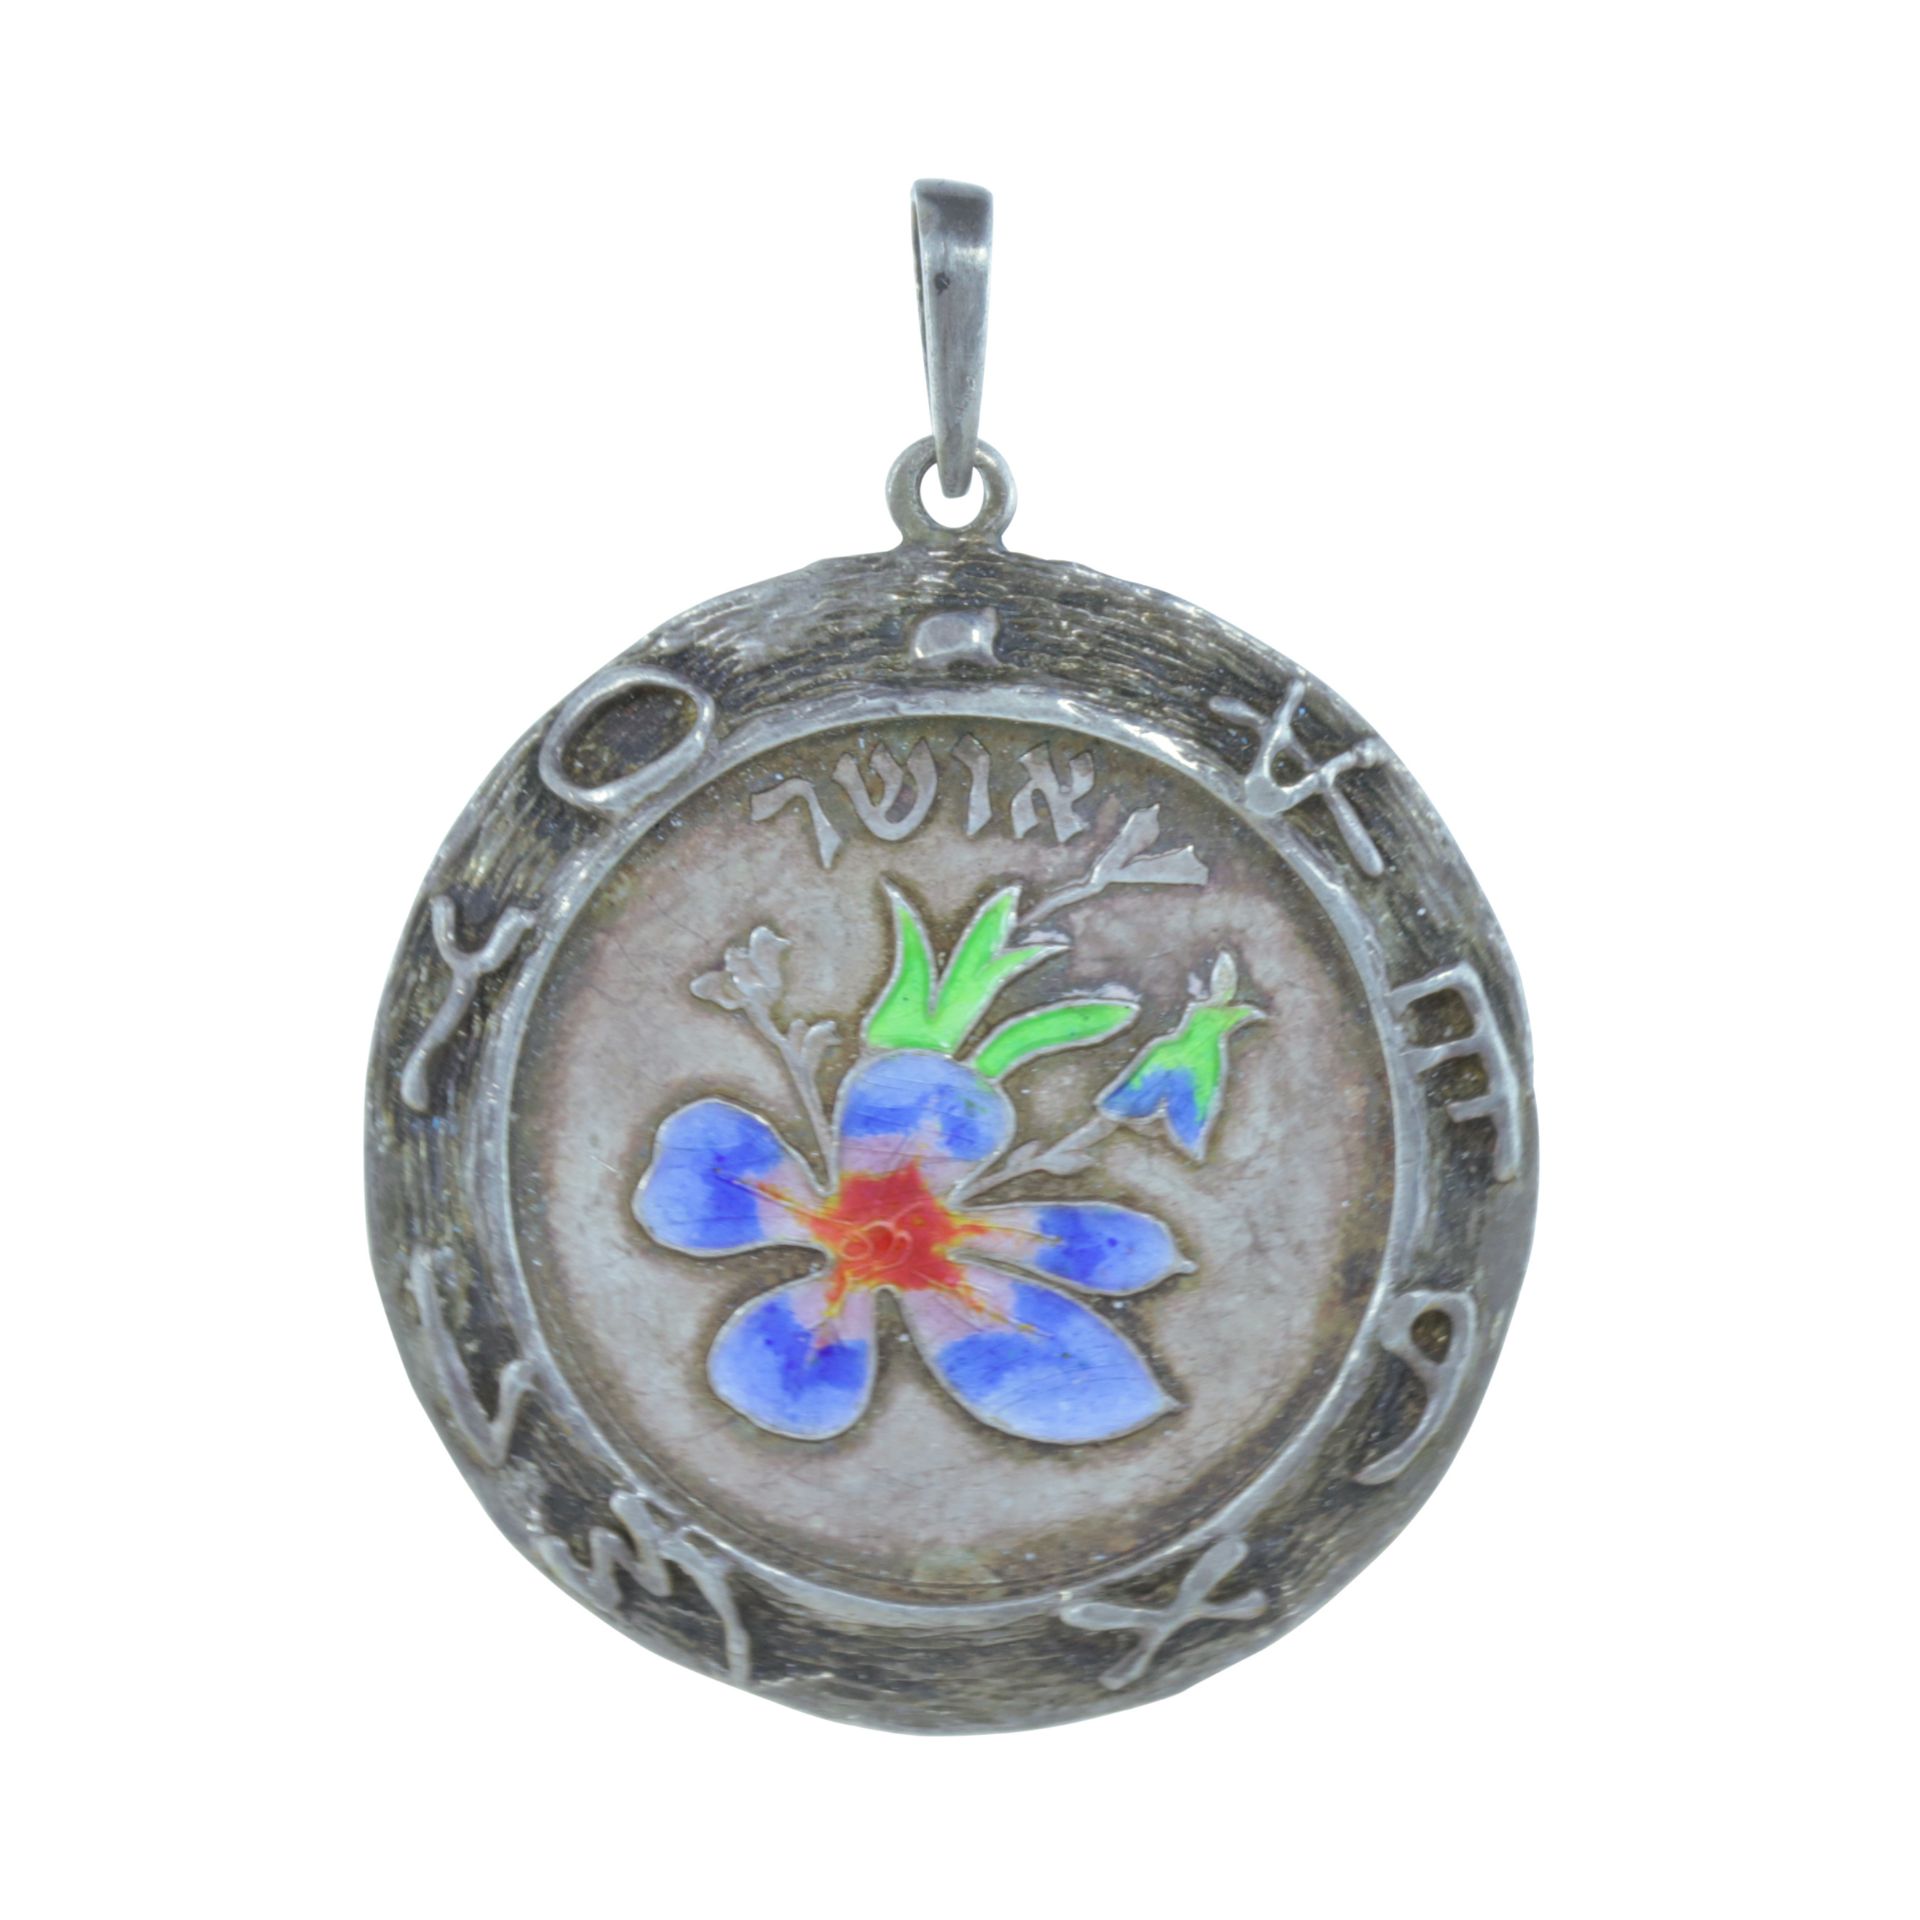 AN ENAMELED SILVER JUDAICA PENDANT of circular form with enameled flowers to the front surrounded by